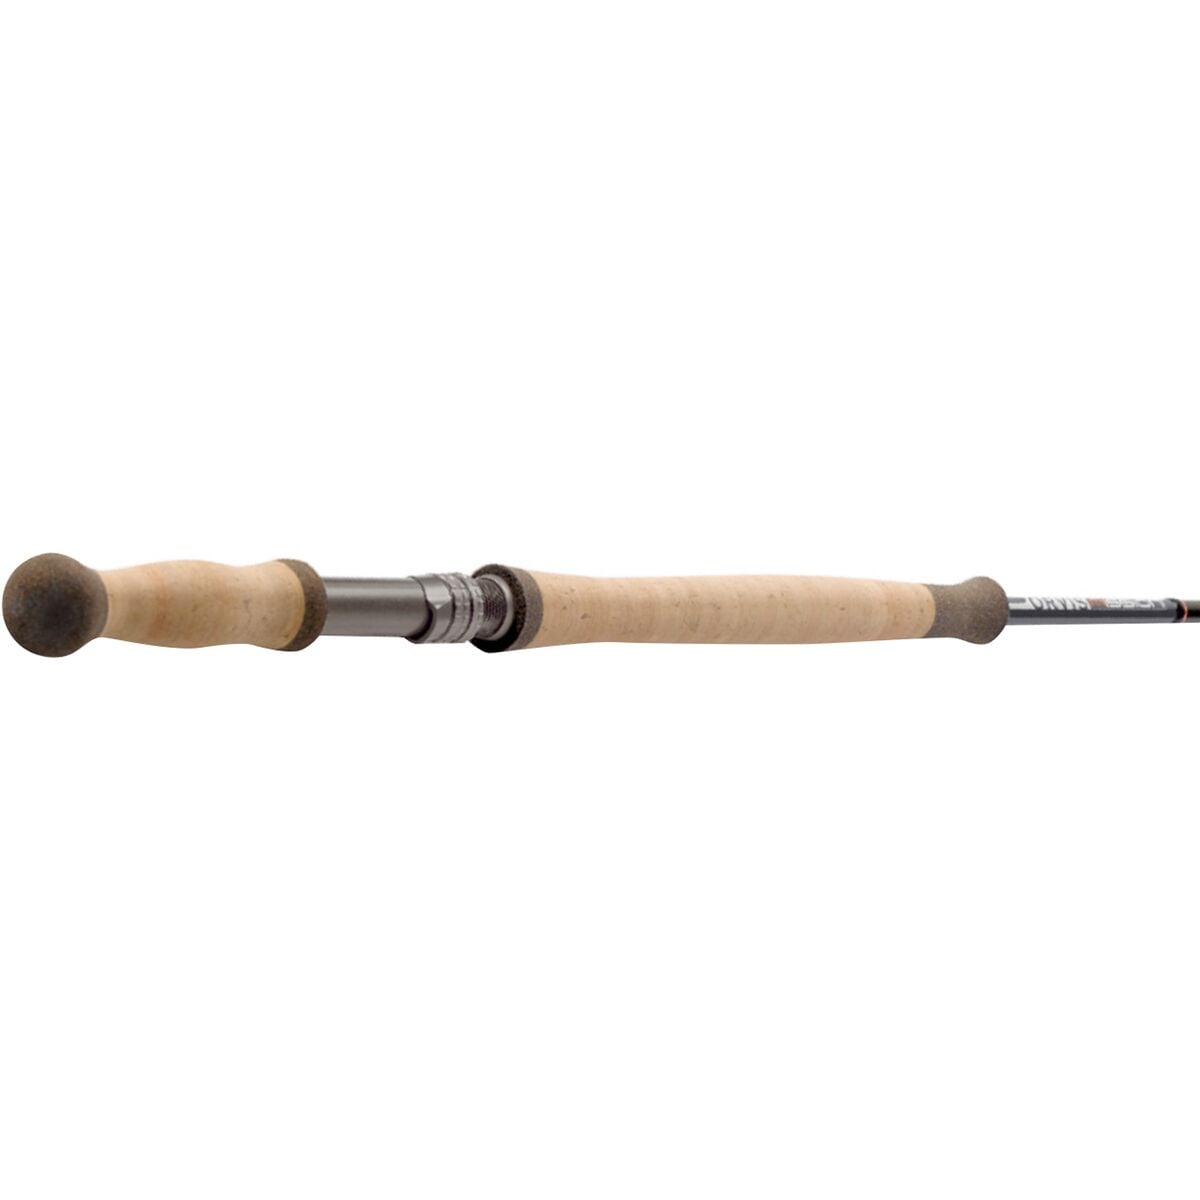 Orvis Mission Fly Rod - 4-Piece